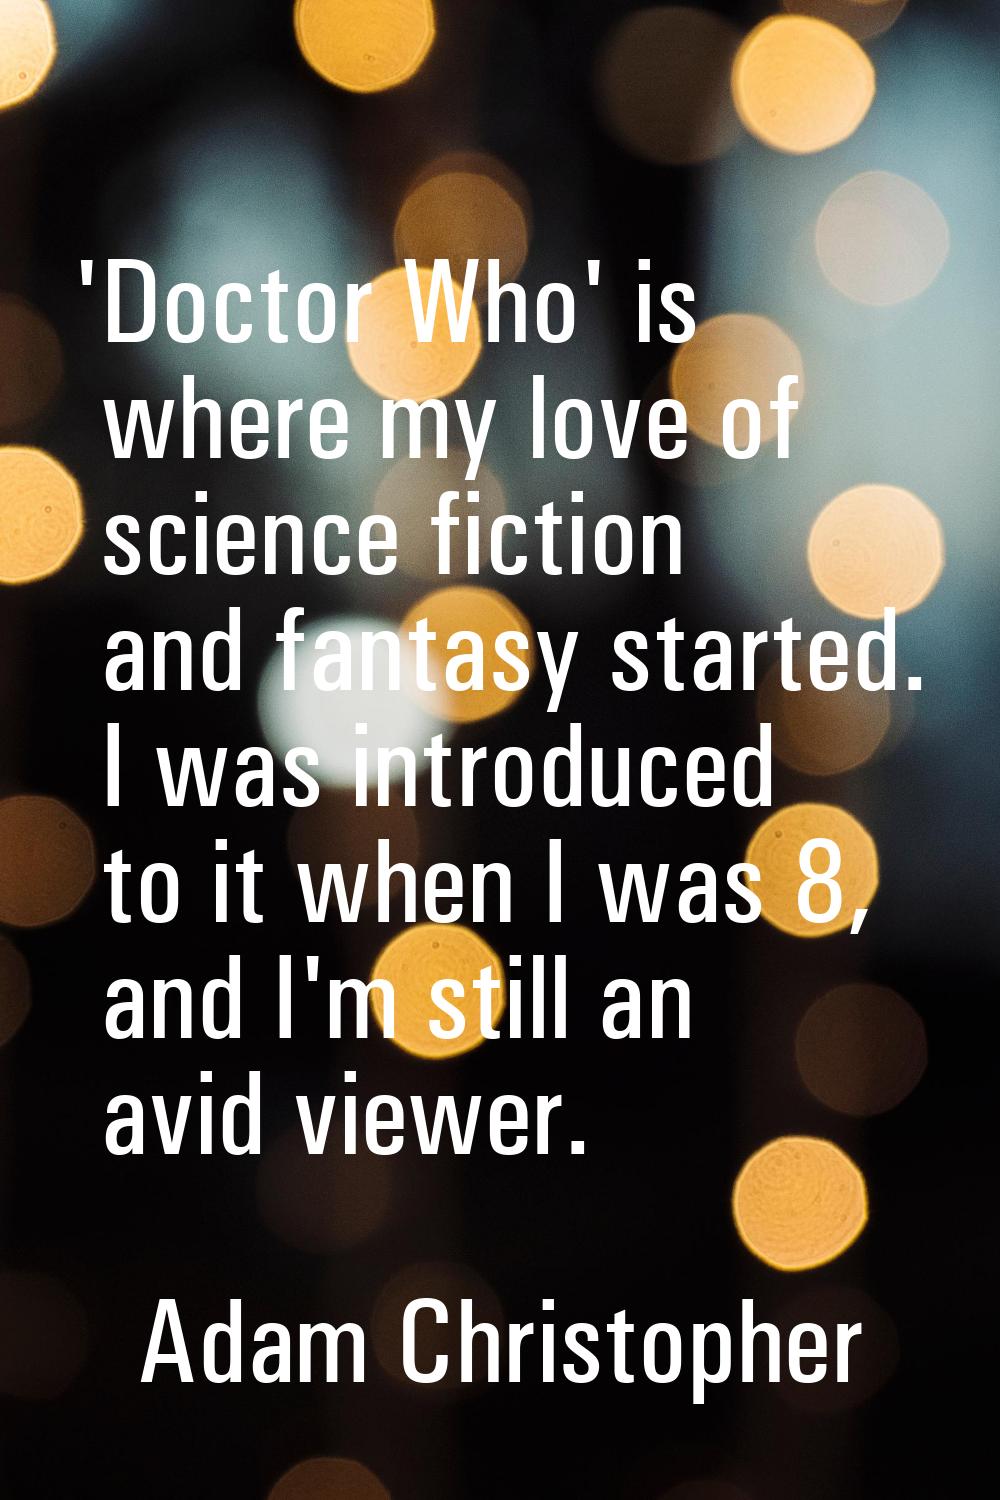 'Doctor Who' is where my love of science fiction and fantasy started. I was introduced to it when I